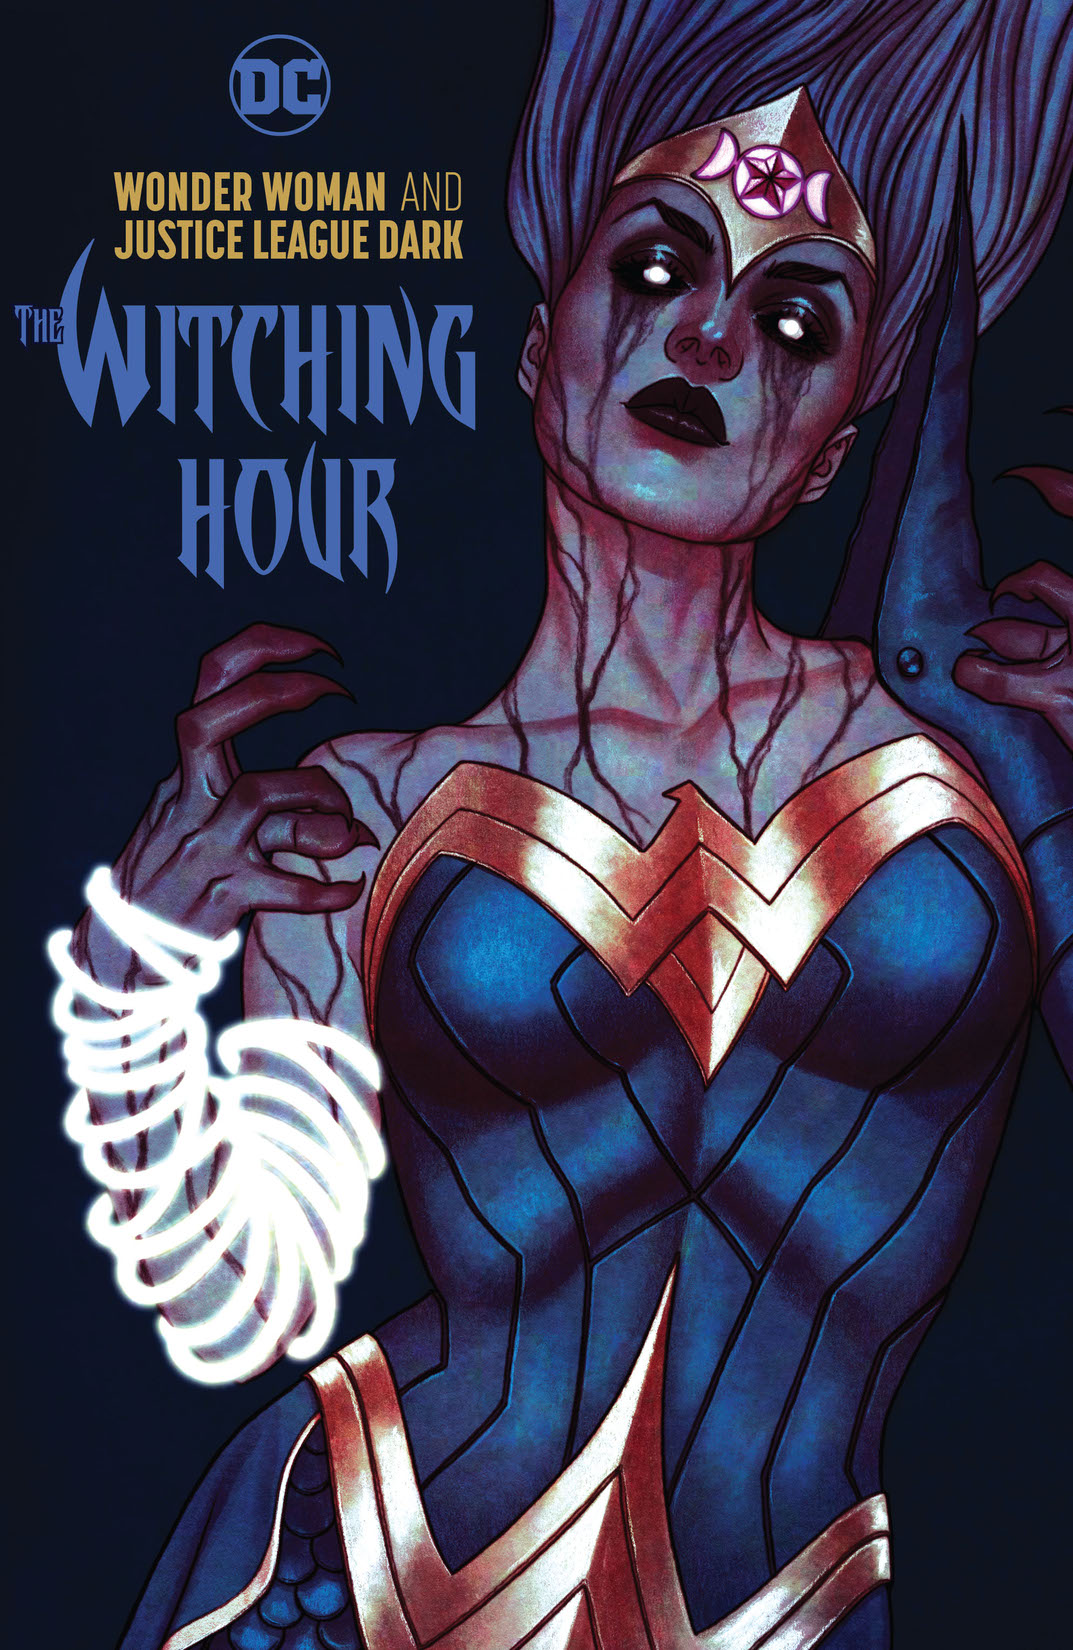 Wonder Woman & the Justice League Dark: The Witching Hour preview images